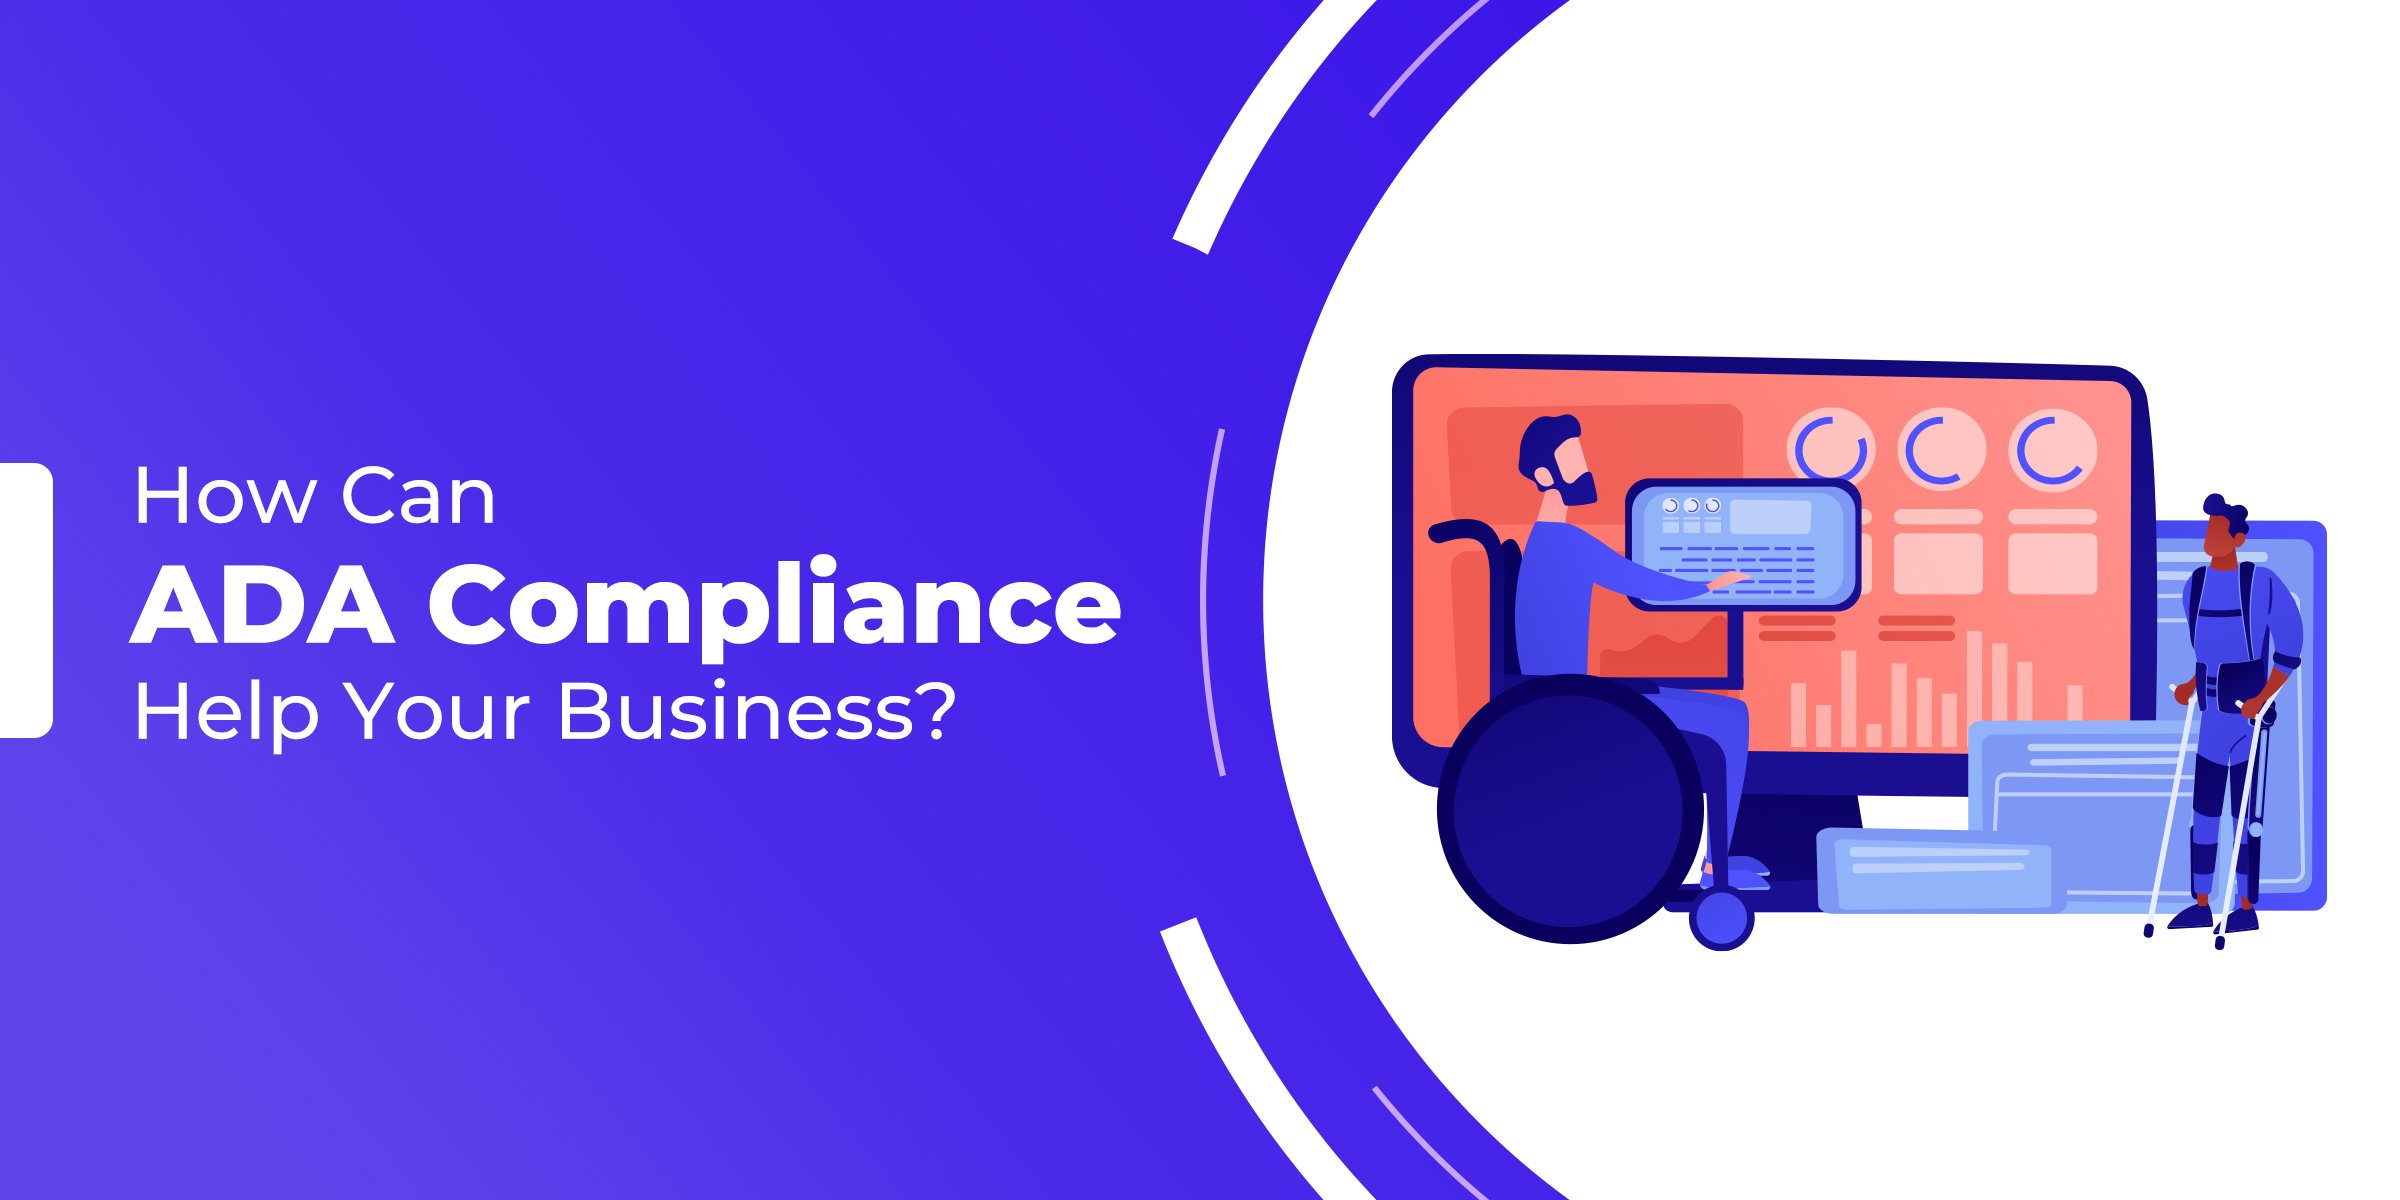 How can ADA compliance help your business?